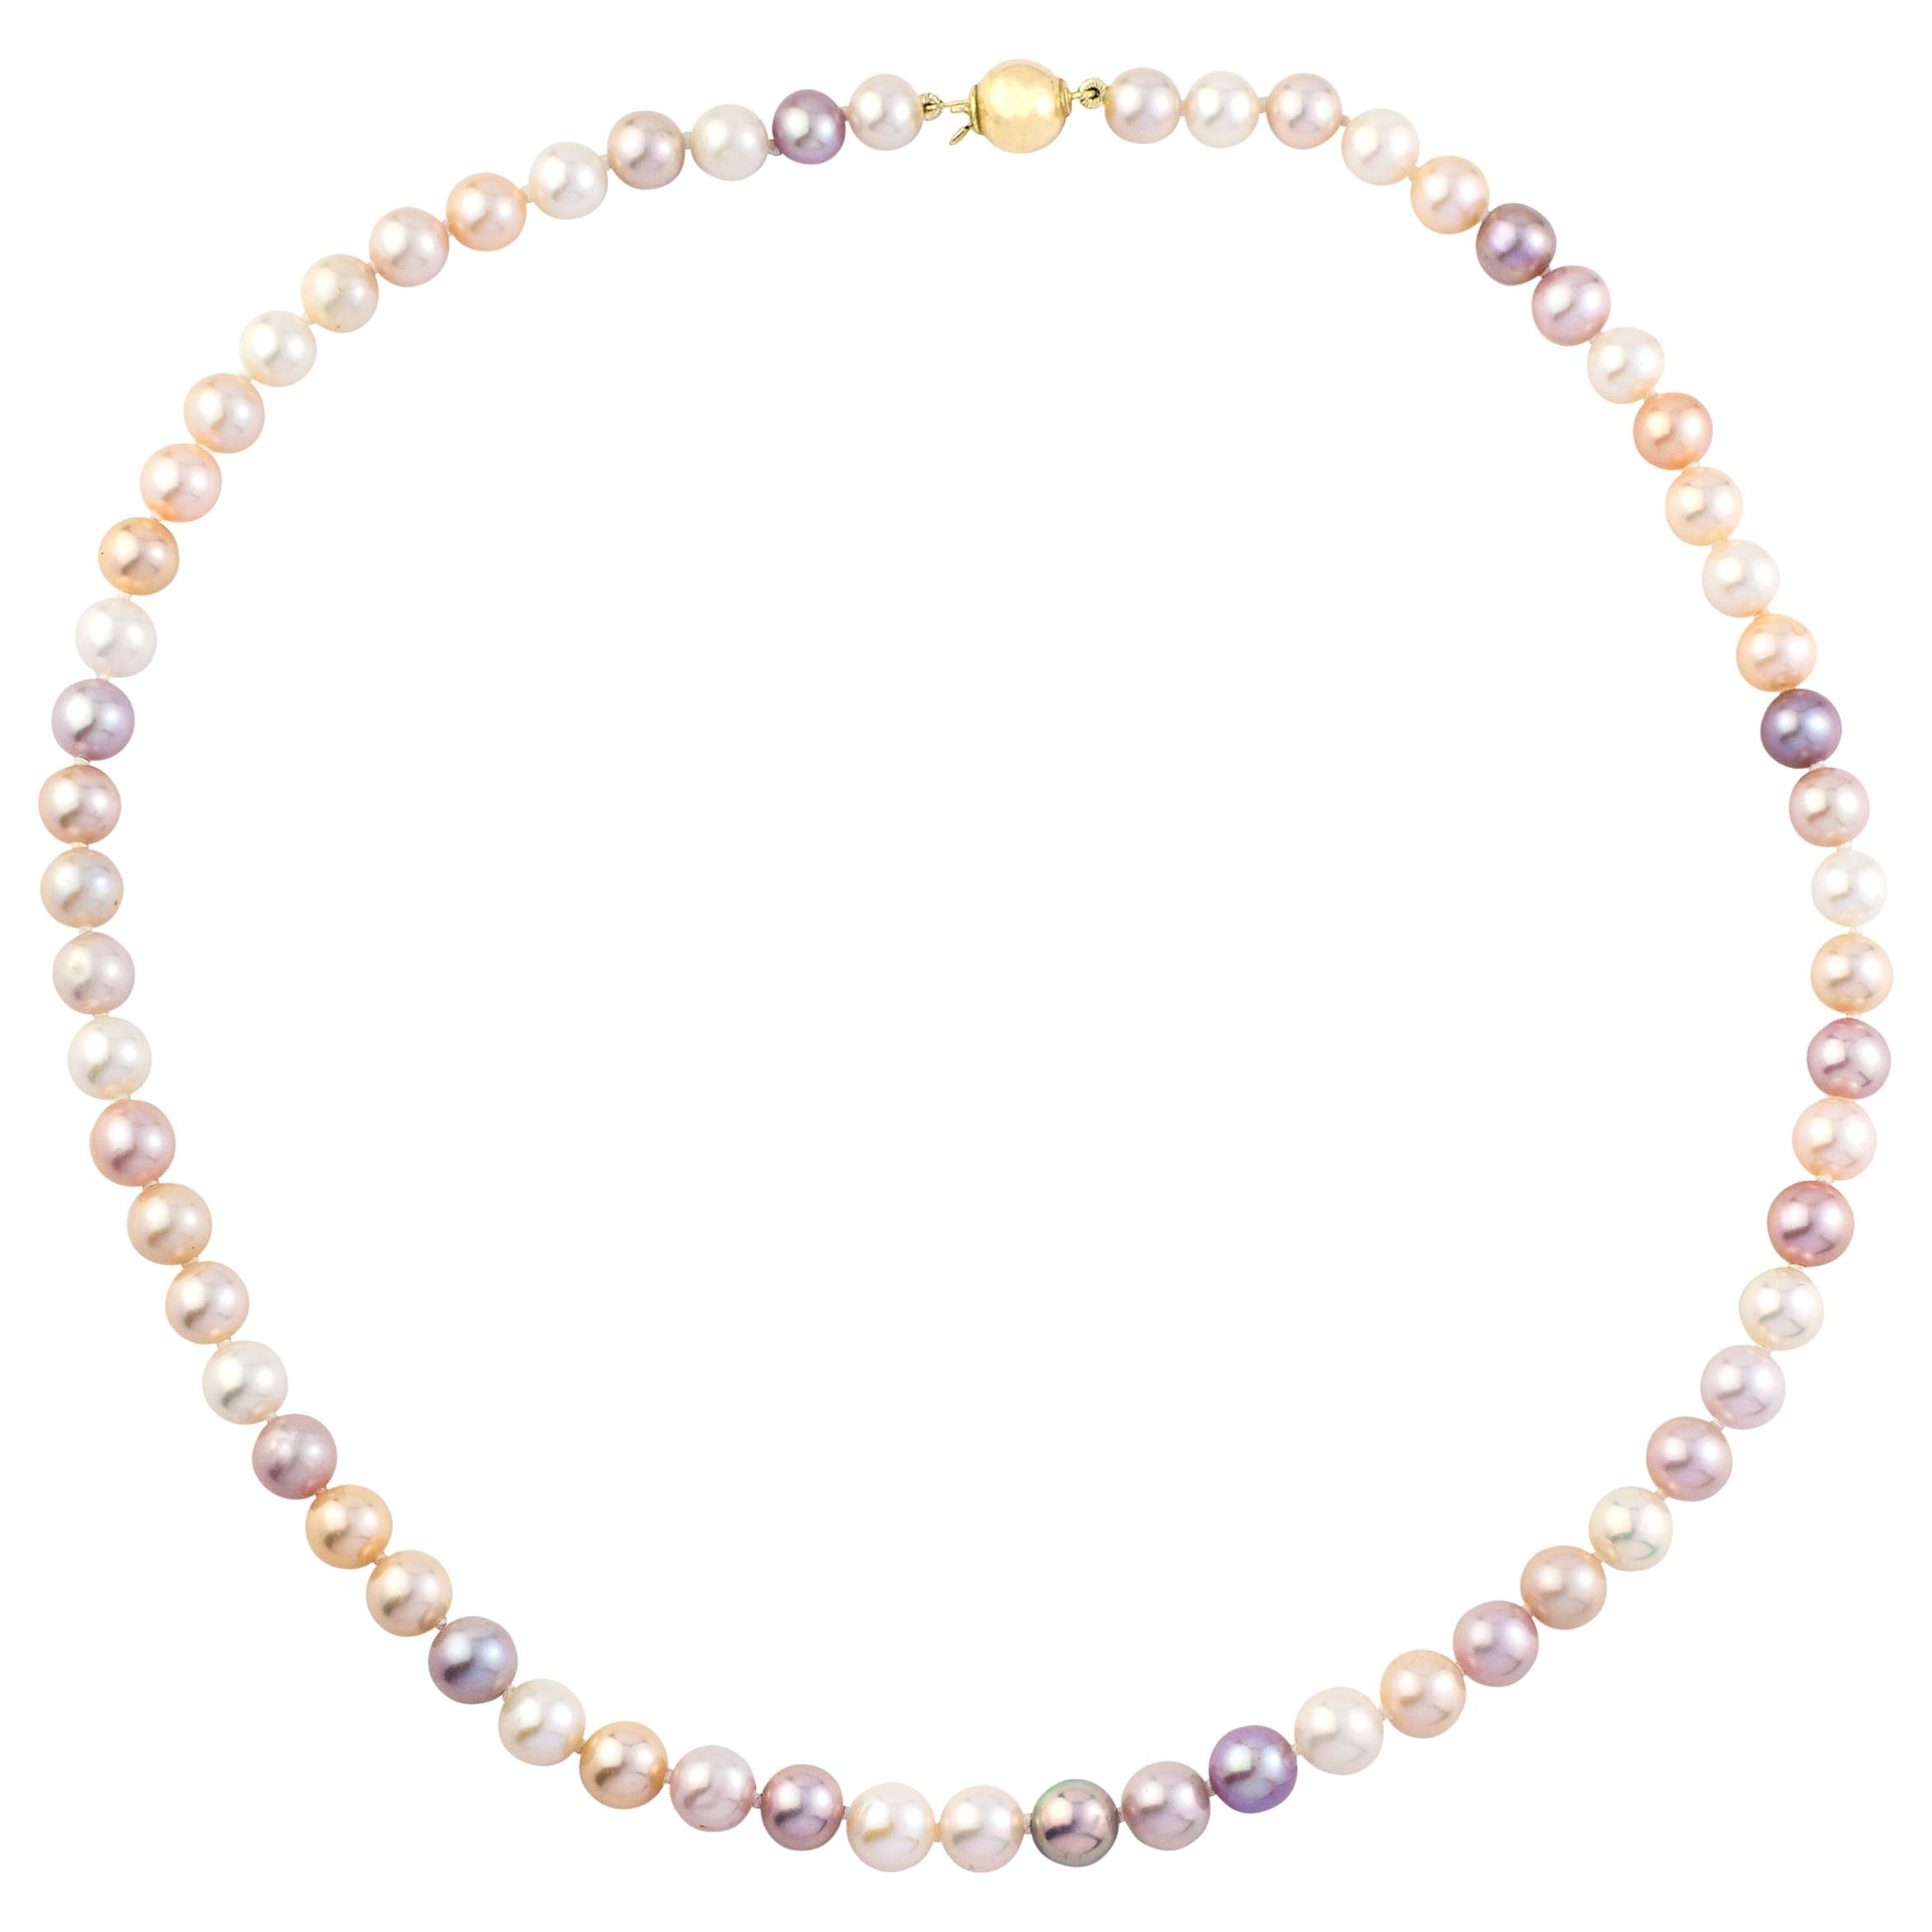 Buy A B Davis 9ct Gold Pearl Necklace, Multi Online at johnlewis.com